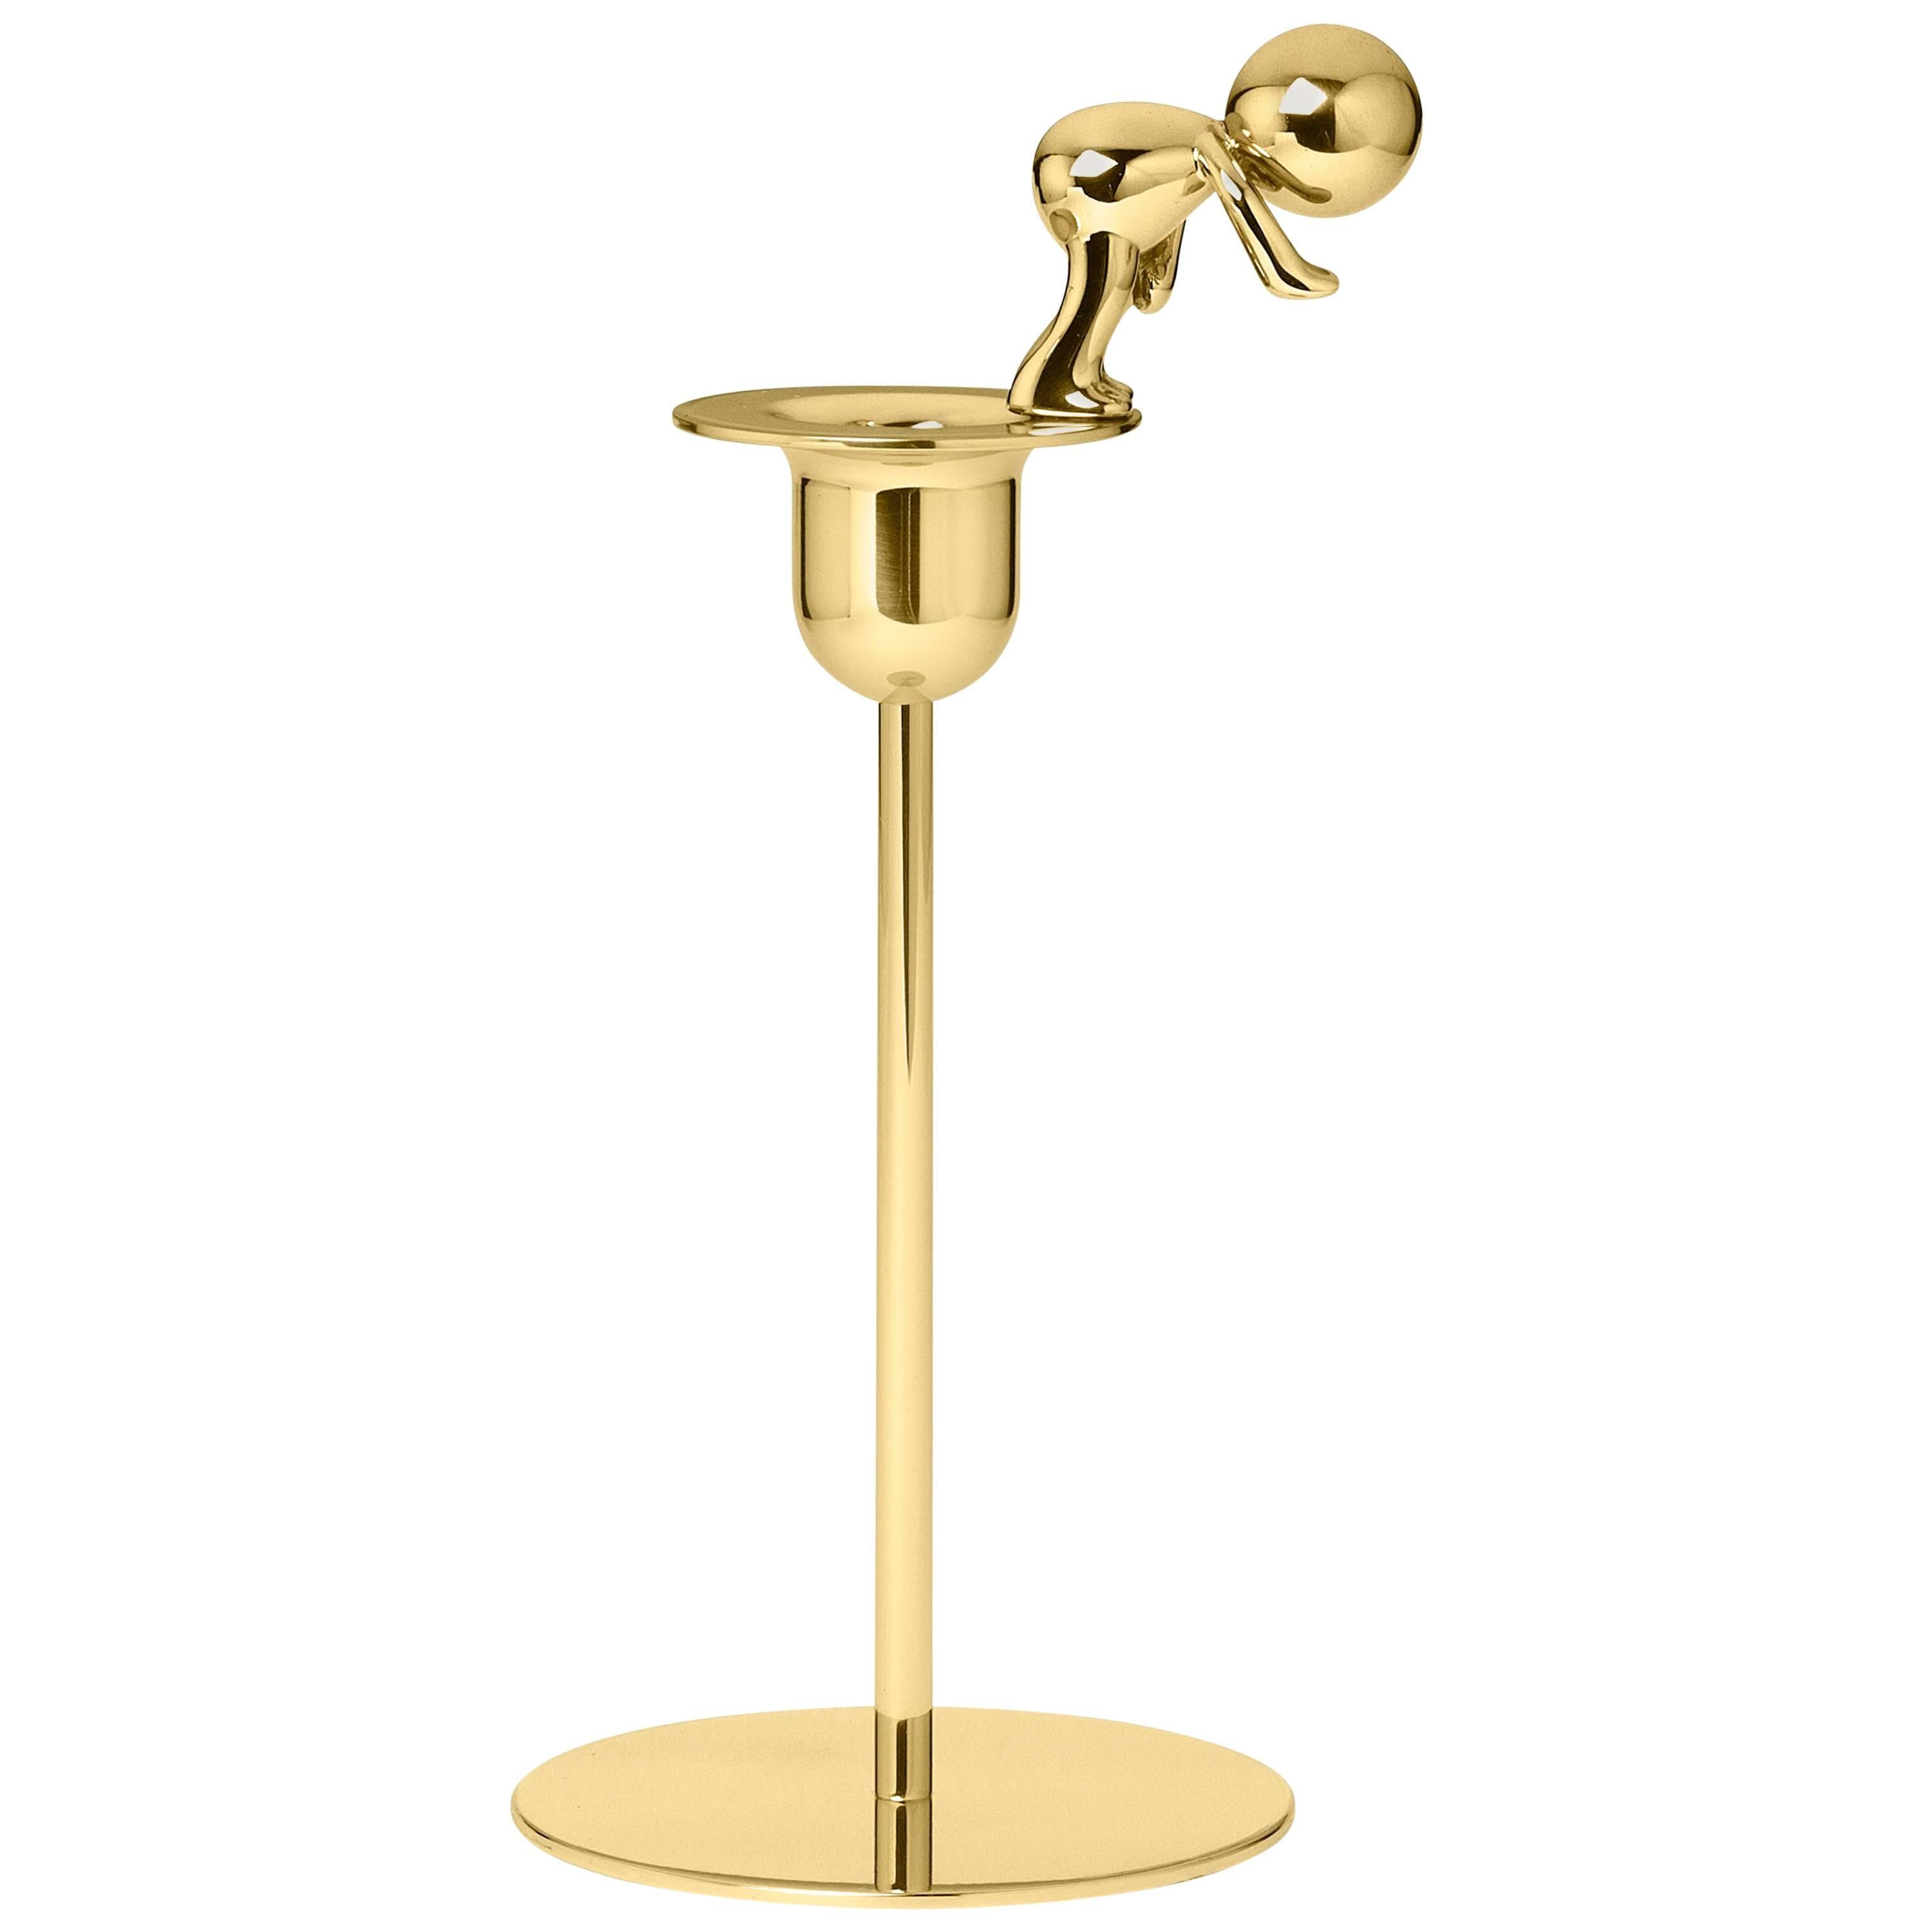 Ghidini 1961 Omini the Diver Short Candlestick in Polished Brass